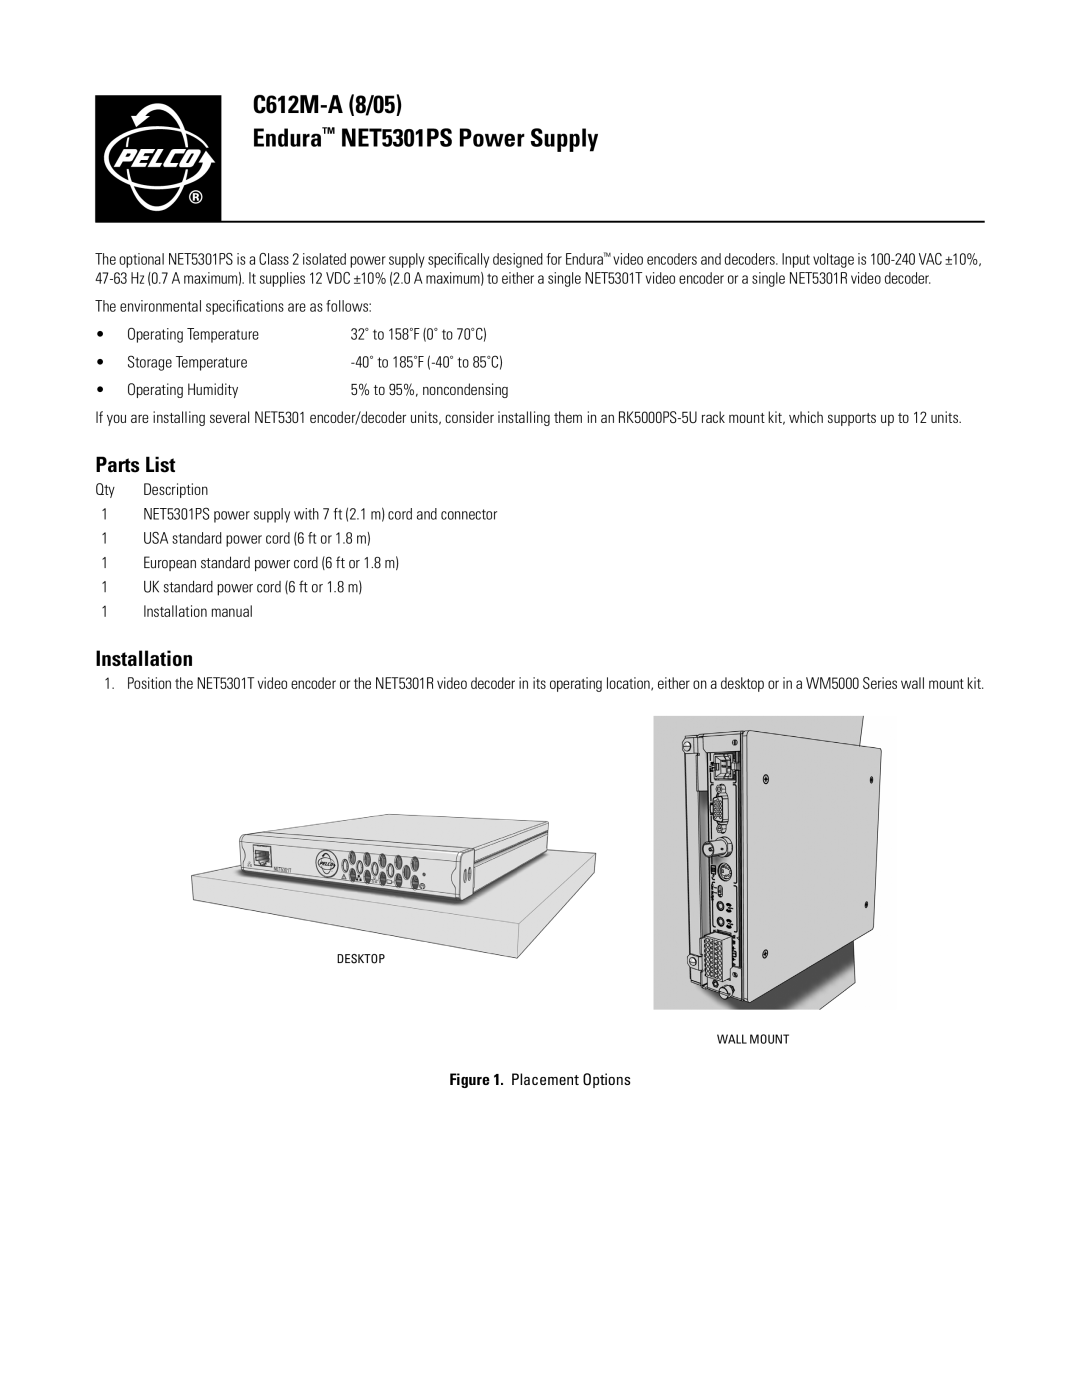 Pelco specifications Parts List, Installation, C612M-A 8/05 Endura NET5301PS Power Supply 